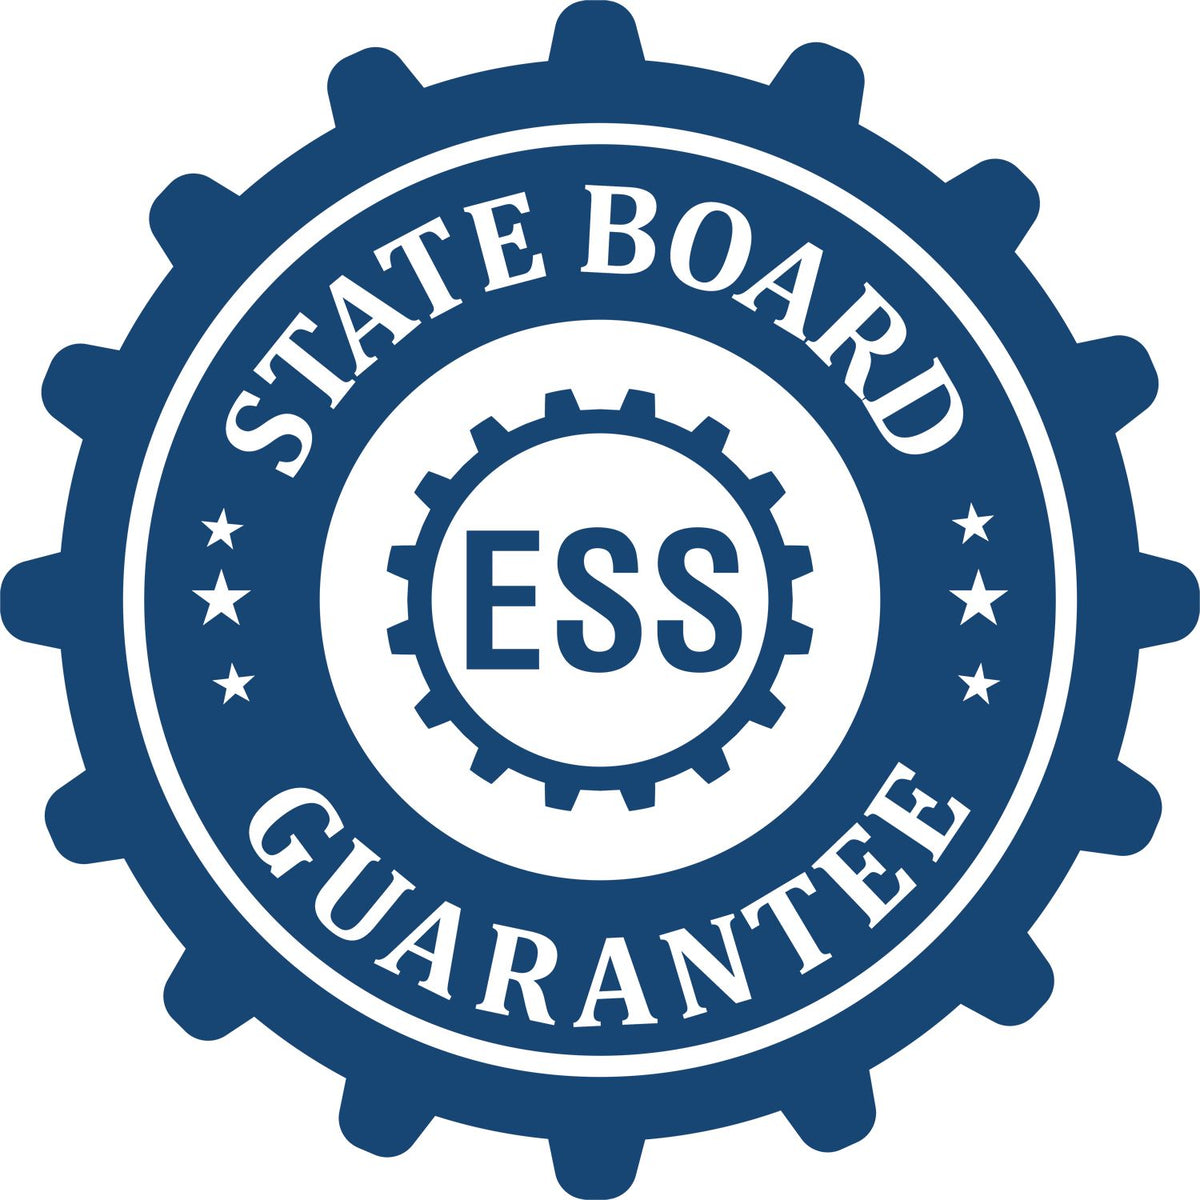 An emblem in a gear shape illustrating a state board guarantee for the Premium MaxLight Pre-Inked Indiana Engineering Stamp product.